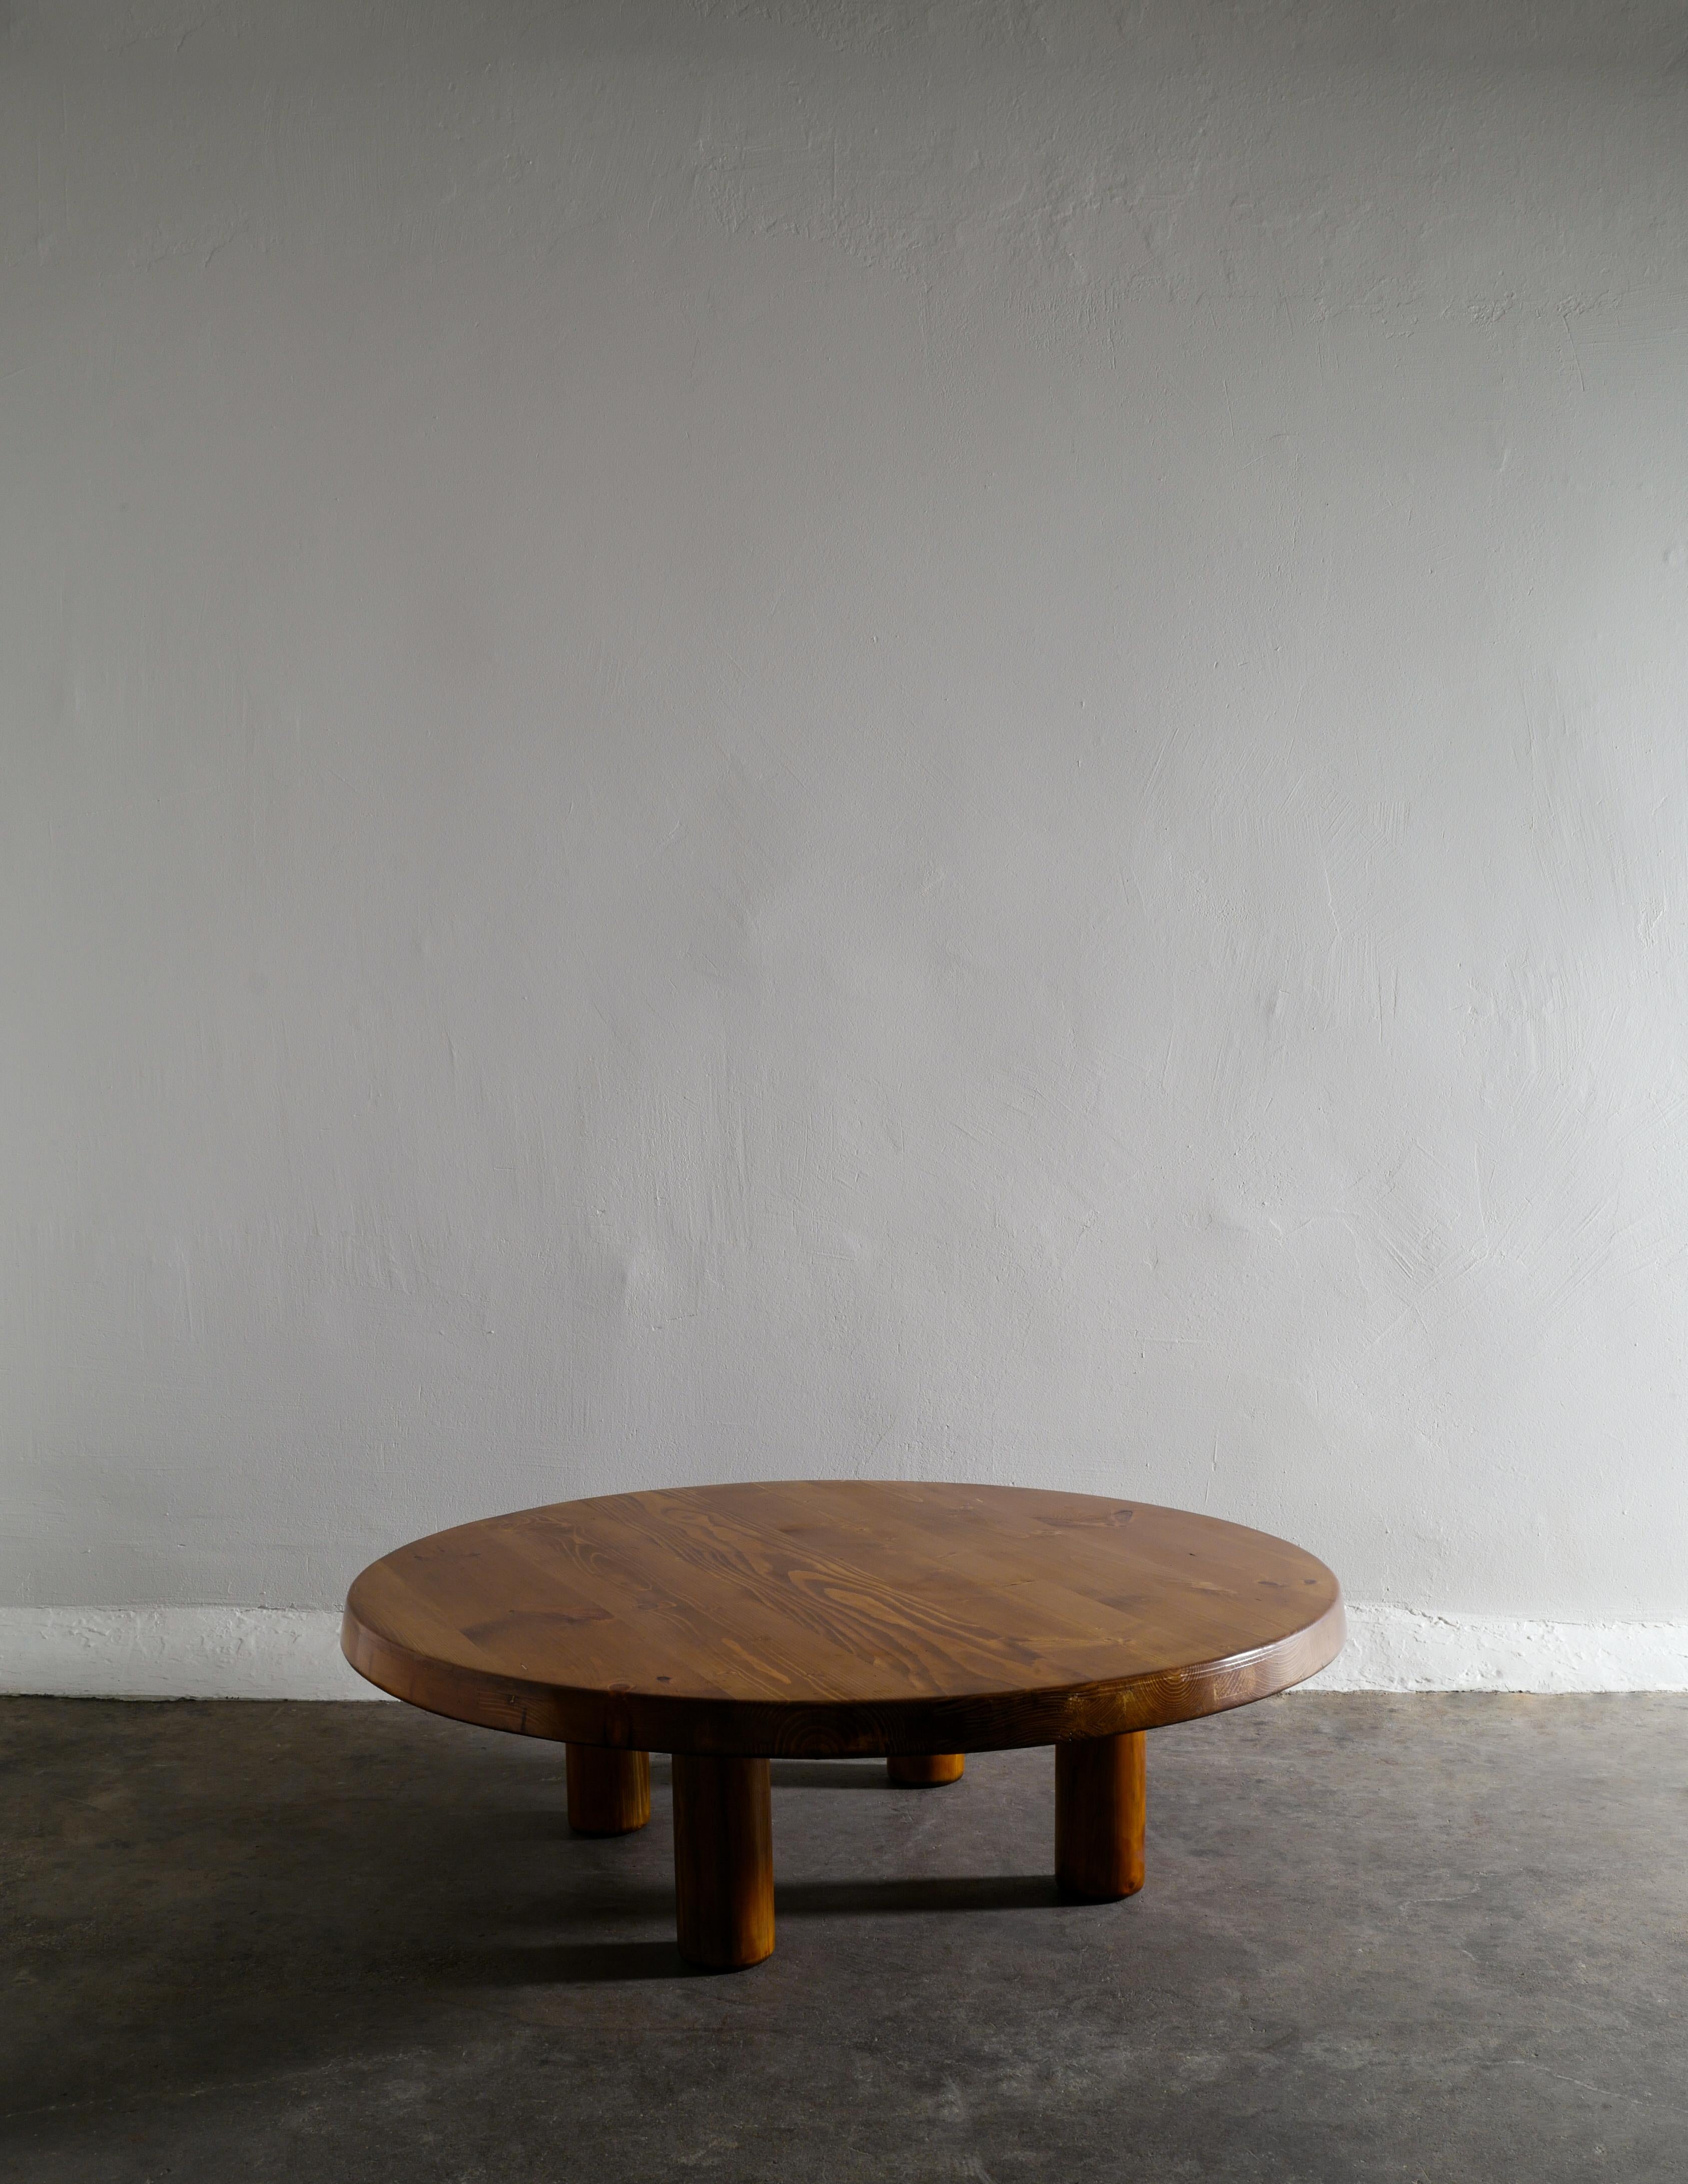 Rare round coffee sofa table in solid stained pine attributed to Charlotte Perriand. Produced in France during the late 1960s. In good vintage condition with some signs from age and use. 

Dimensions: Height 32 cm diameter: 105 cm.